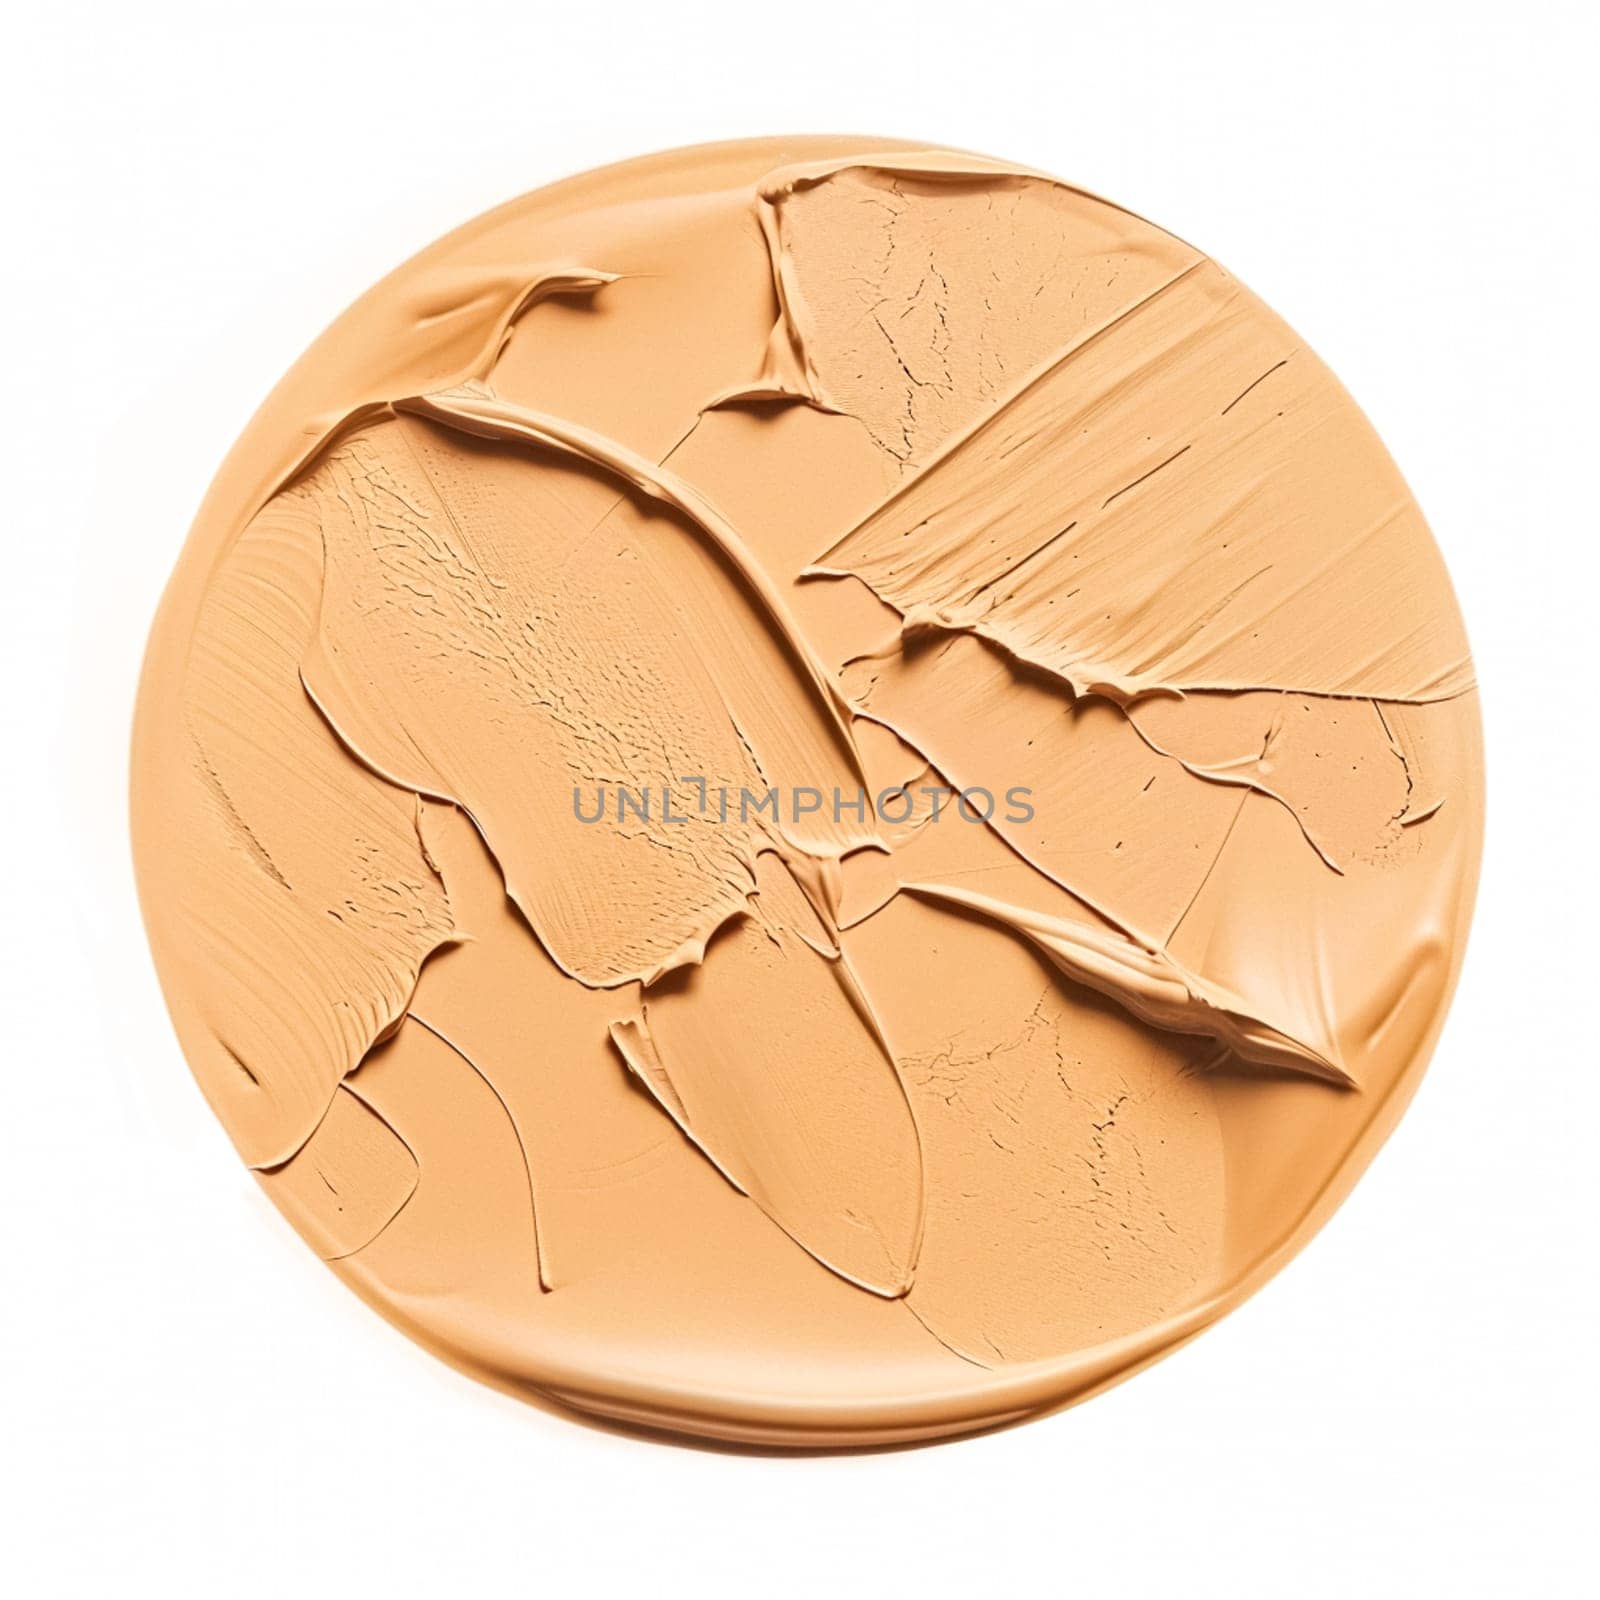 Make-up foundation texture as circle shape design, beauty product and cosmetics, makeup blush eyeshadow powder as abstract luxury cosmetic background art